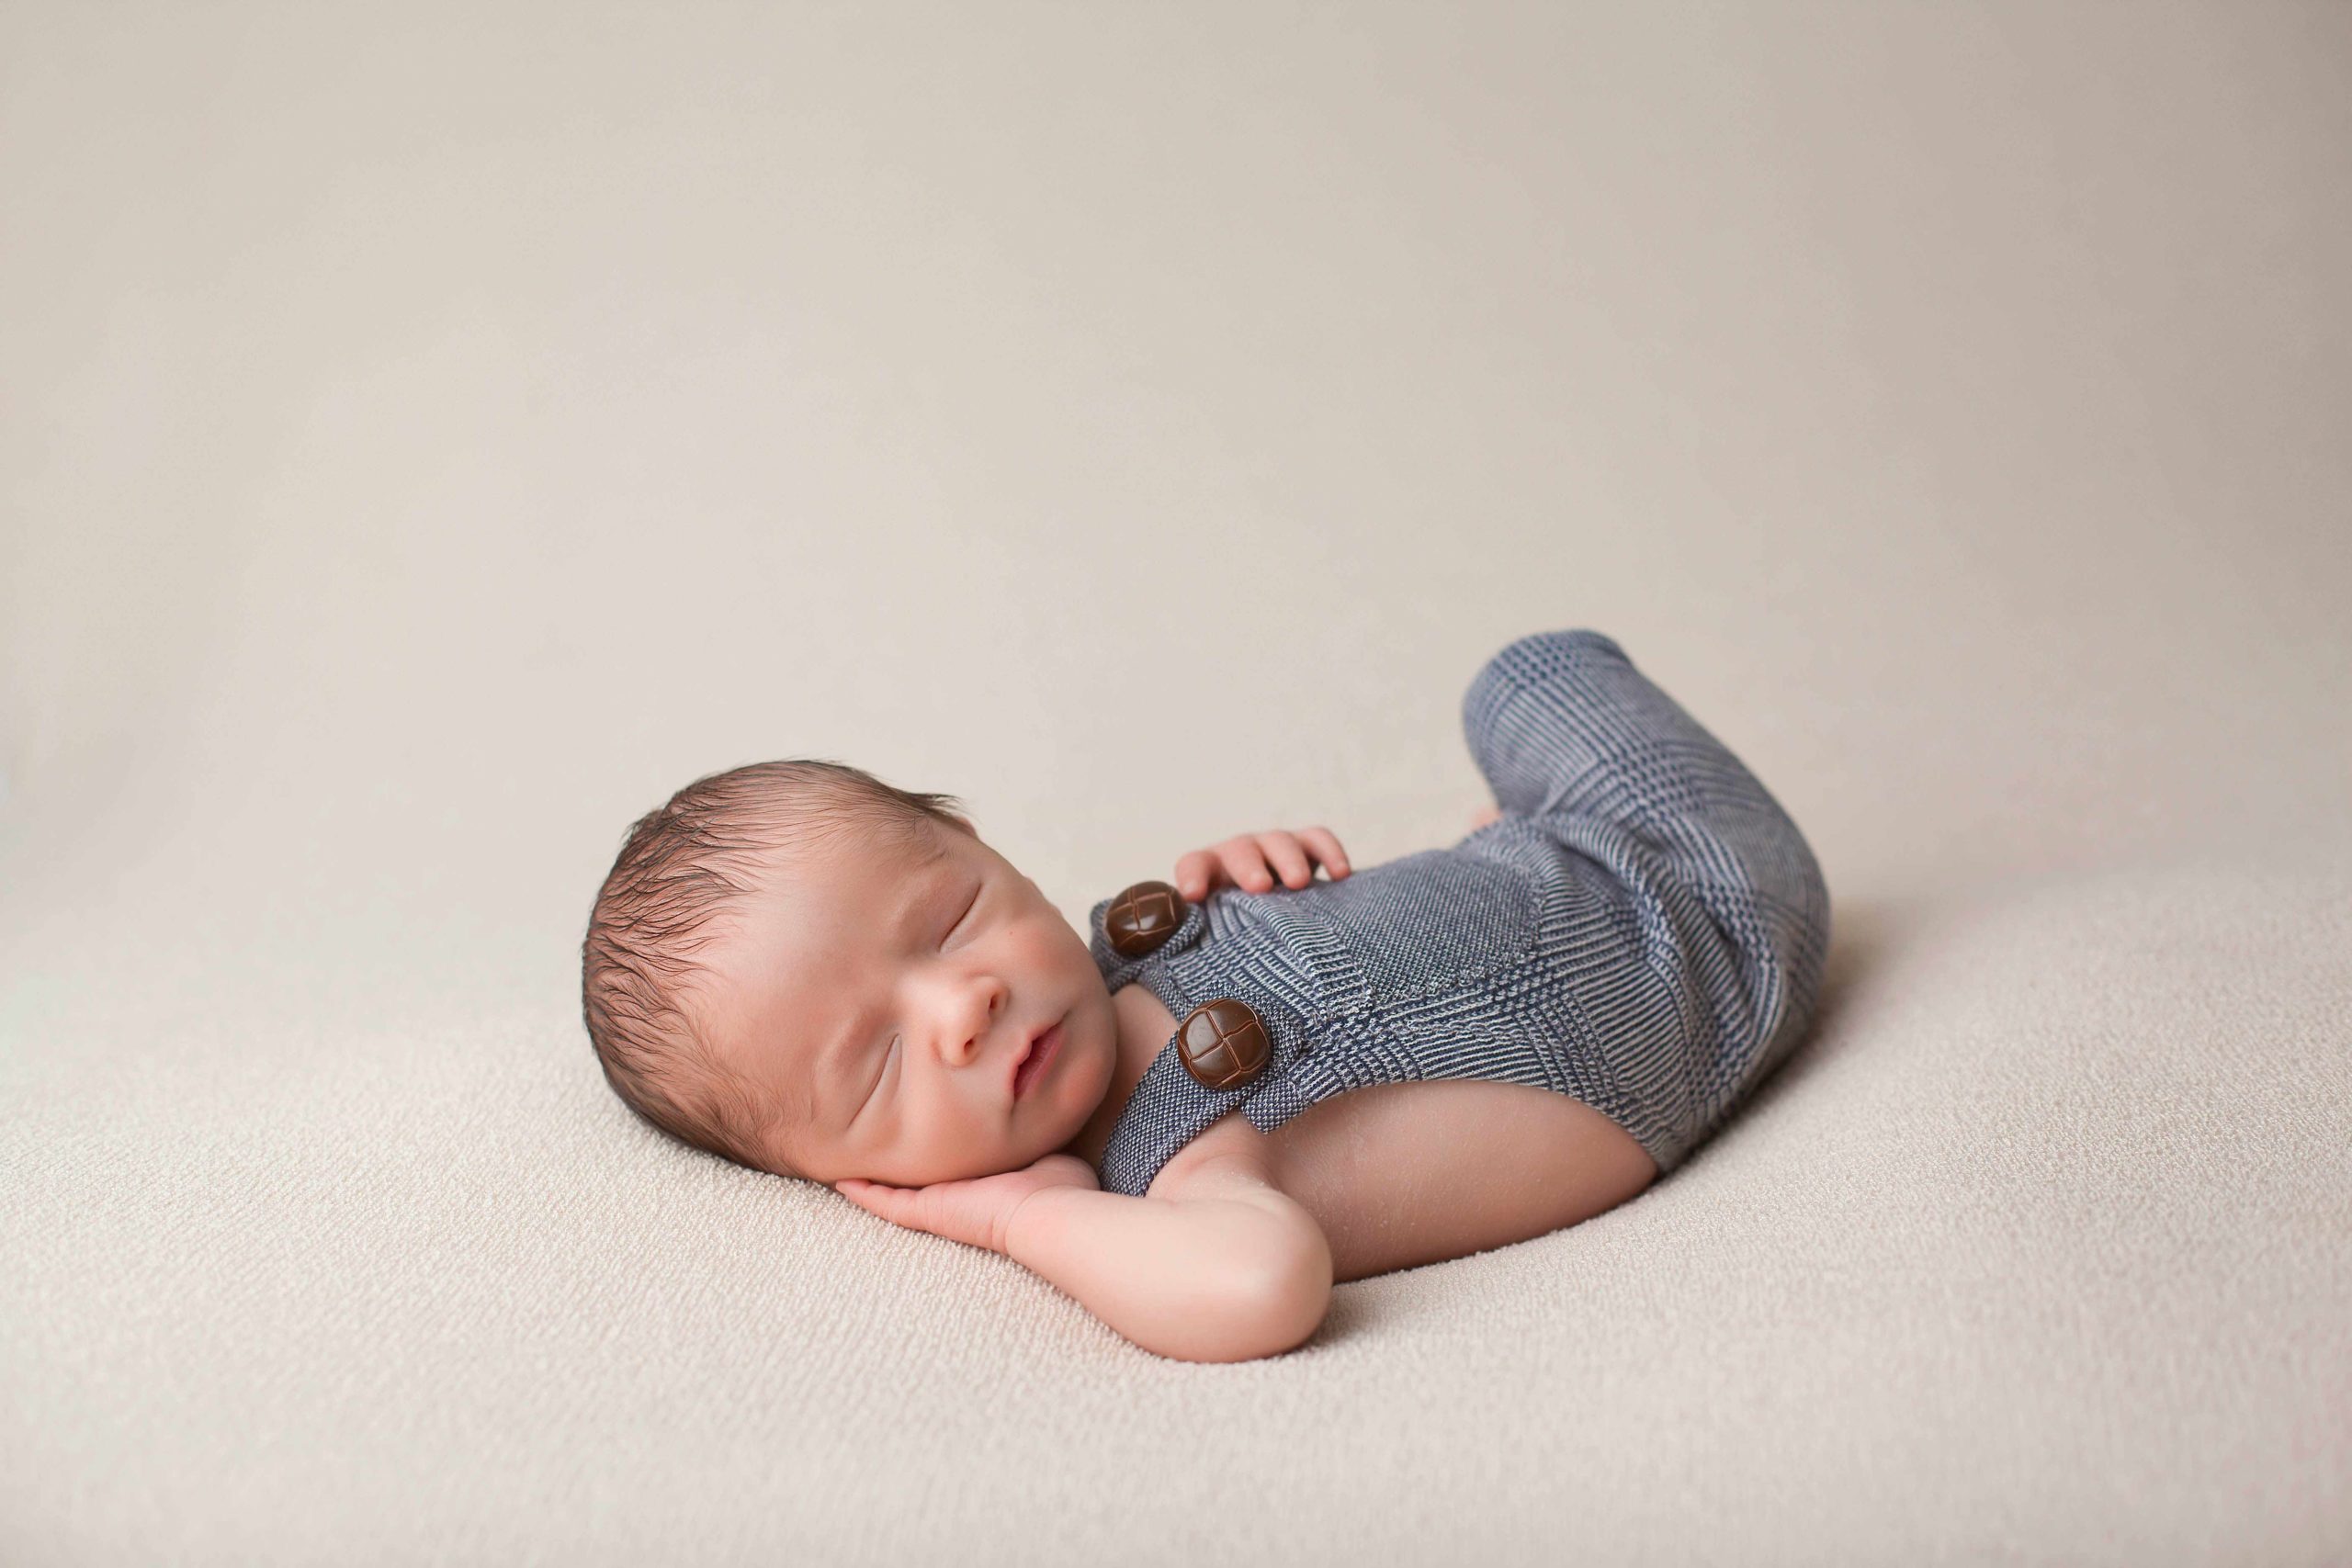 When interviewing potential newborn photographers; be sure to ask if all props and wraps seen on website and social media are included in package prices.